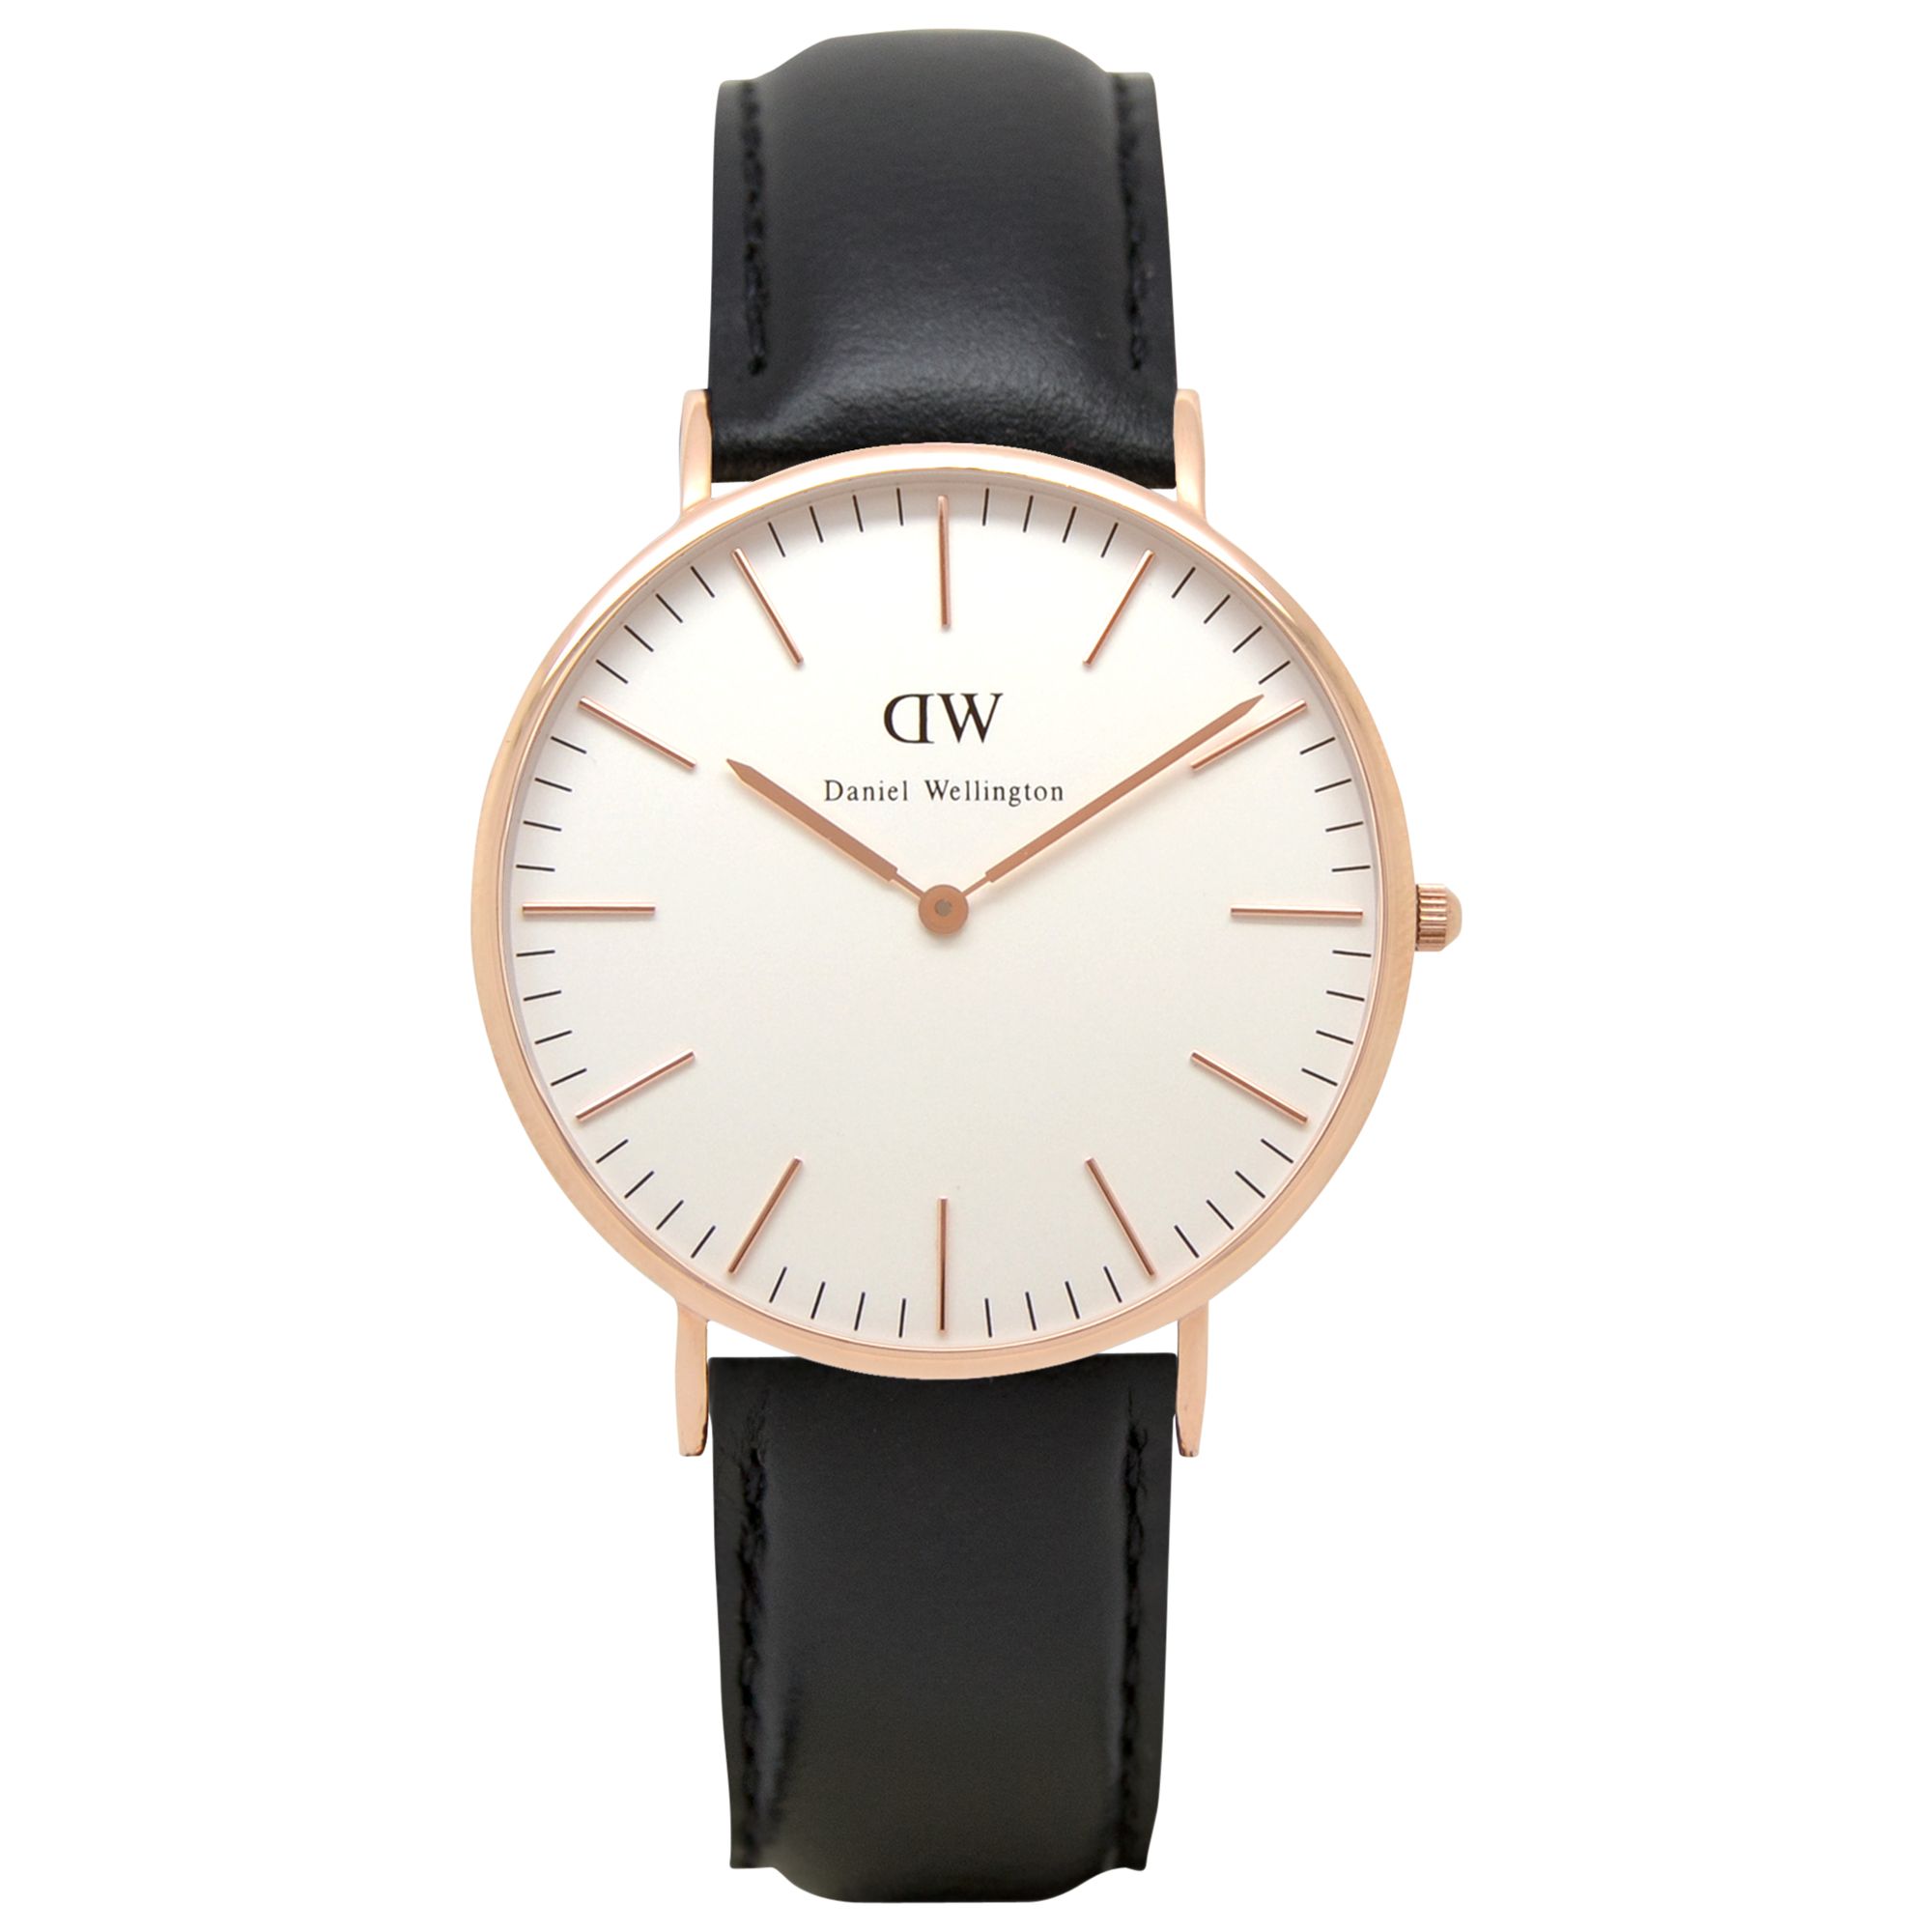 Daniel Wellington 0107dw Men S Sheffield Rose Gold Plated Leather Strap Watch Black White At